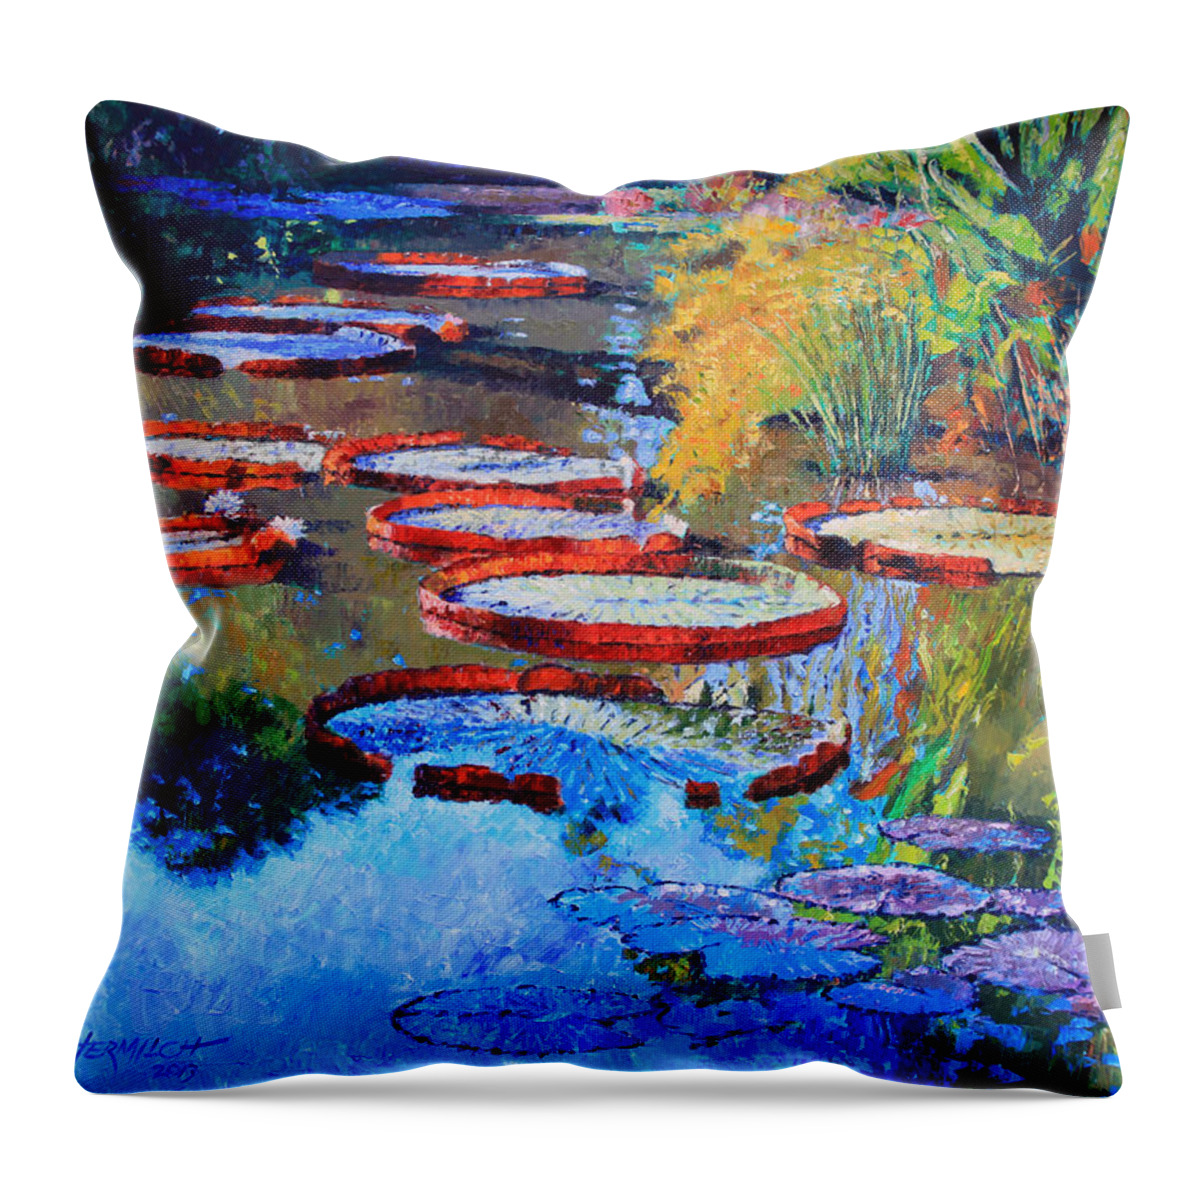 Garden Pond Throw Pillow featuring the painting Good Morning Lily Pond by John Lautermilch